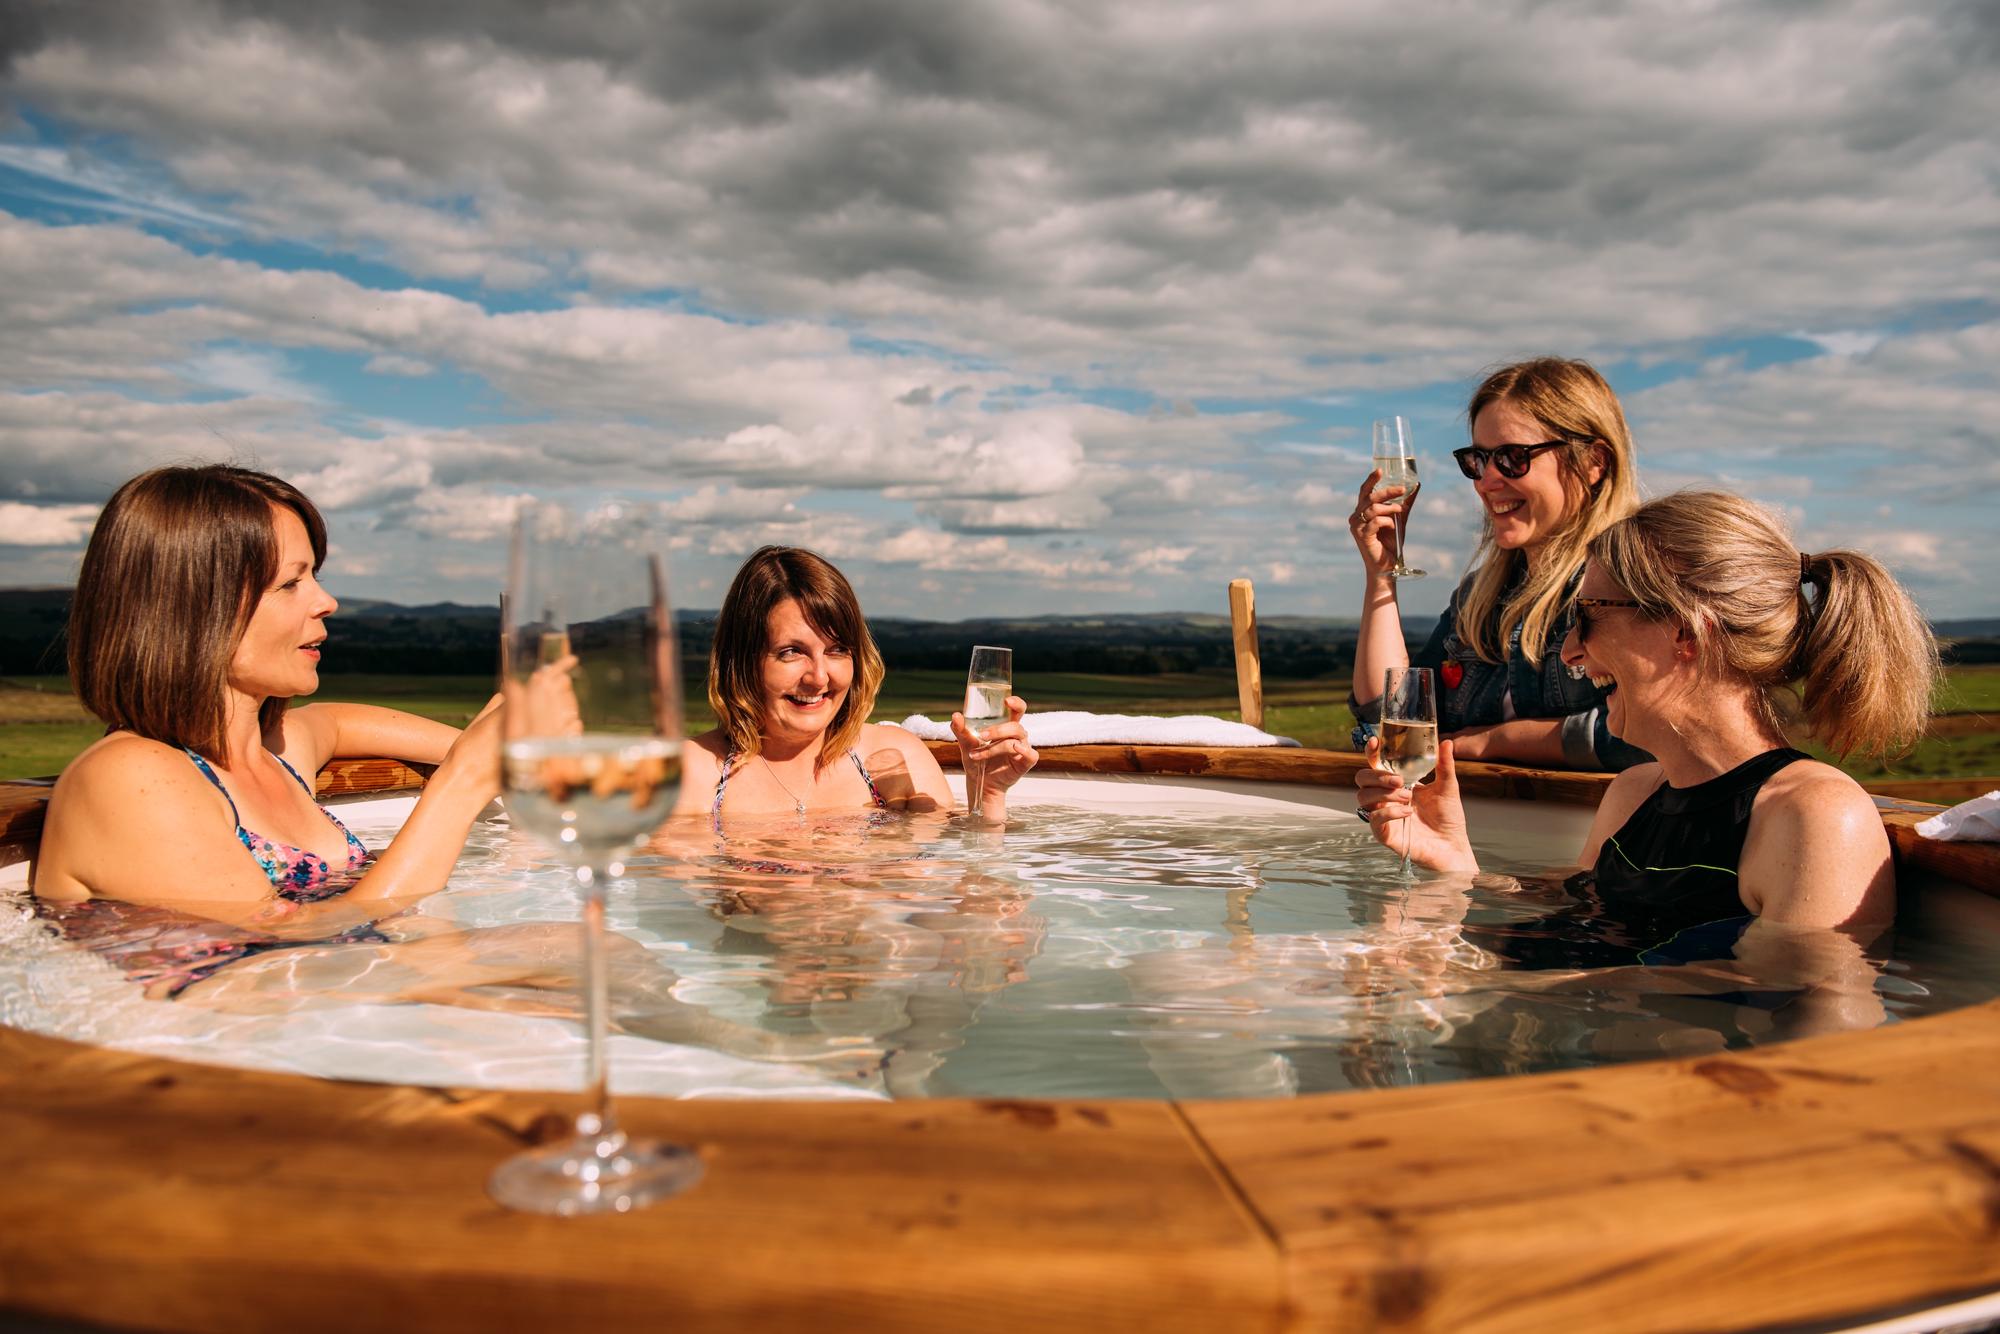 Hot Tub Glamping | The Best Glamping Sites With Hot Tubs